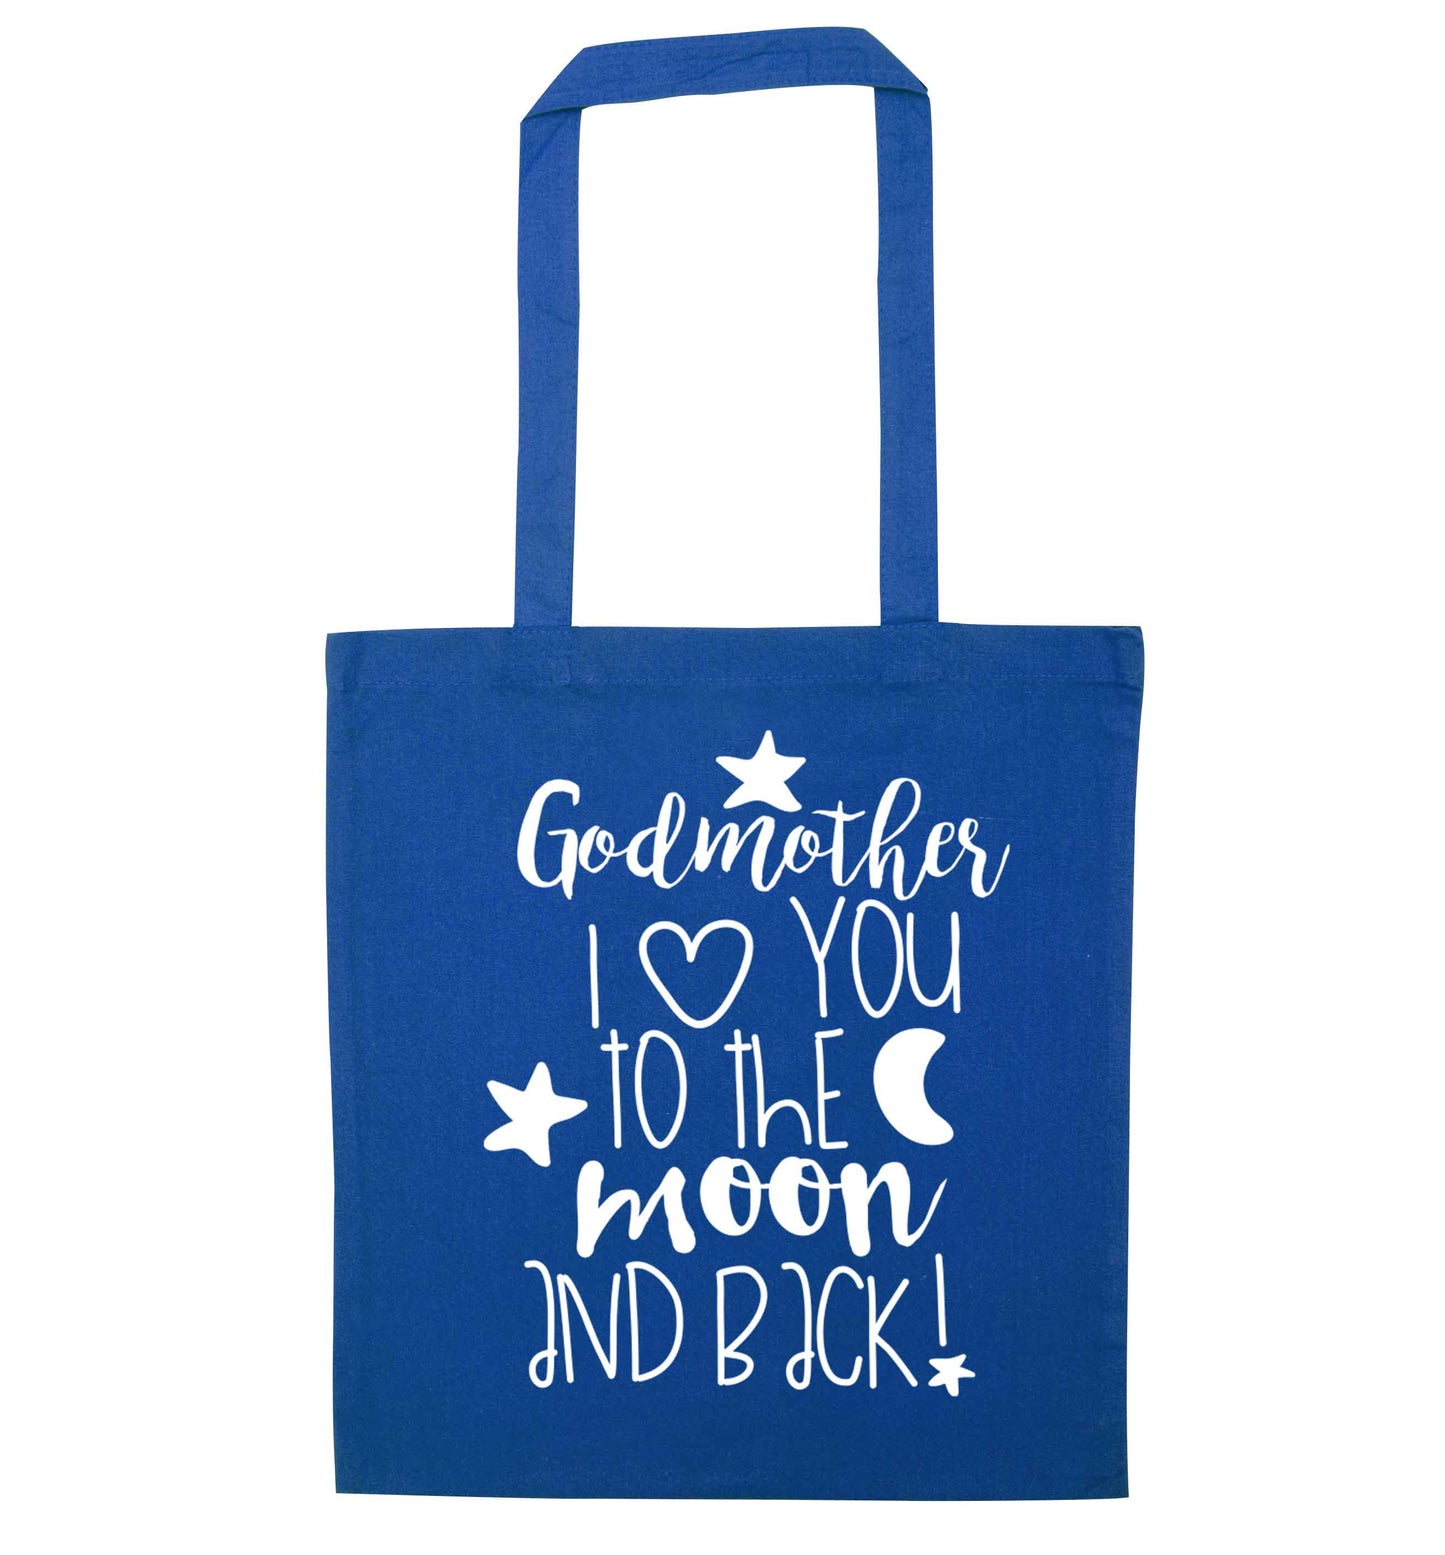 Godmother I love you to the moon and back blue tote bag